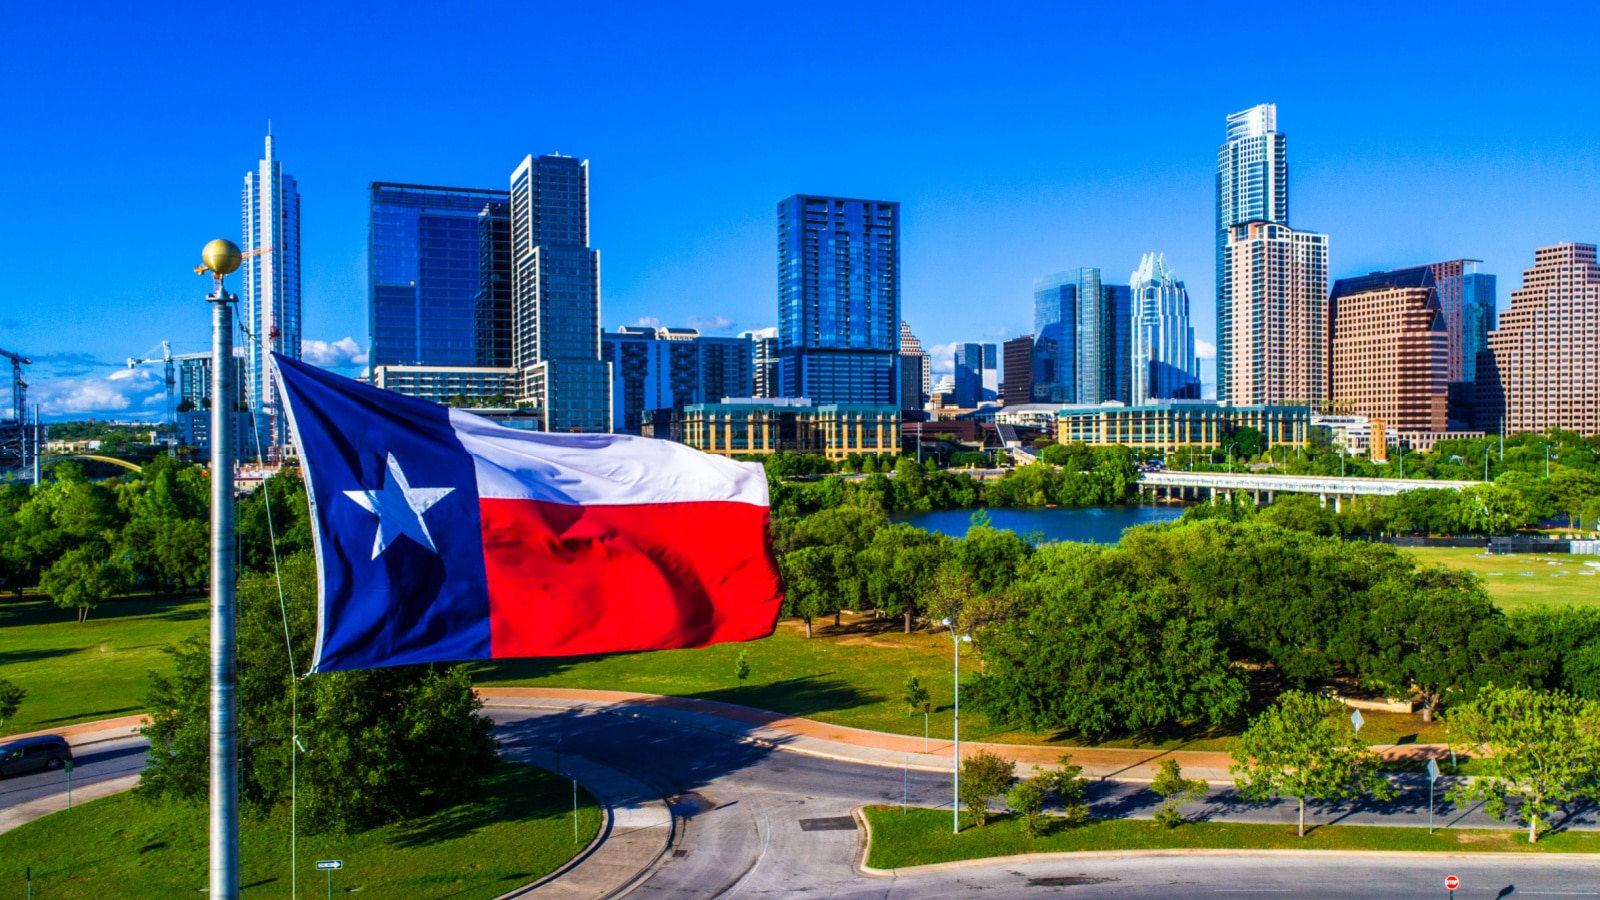 ATX City Skyline Texas Flag patriotic National Pride Displays the Lone Star State with a Colorful Austin Texas Skyline Cityscape Capital Cities Background on a Nice Sunny Summer Blue Sky Day